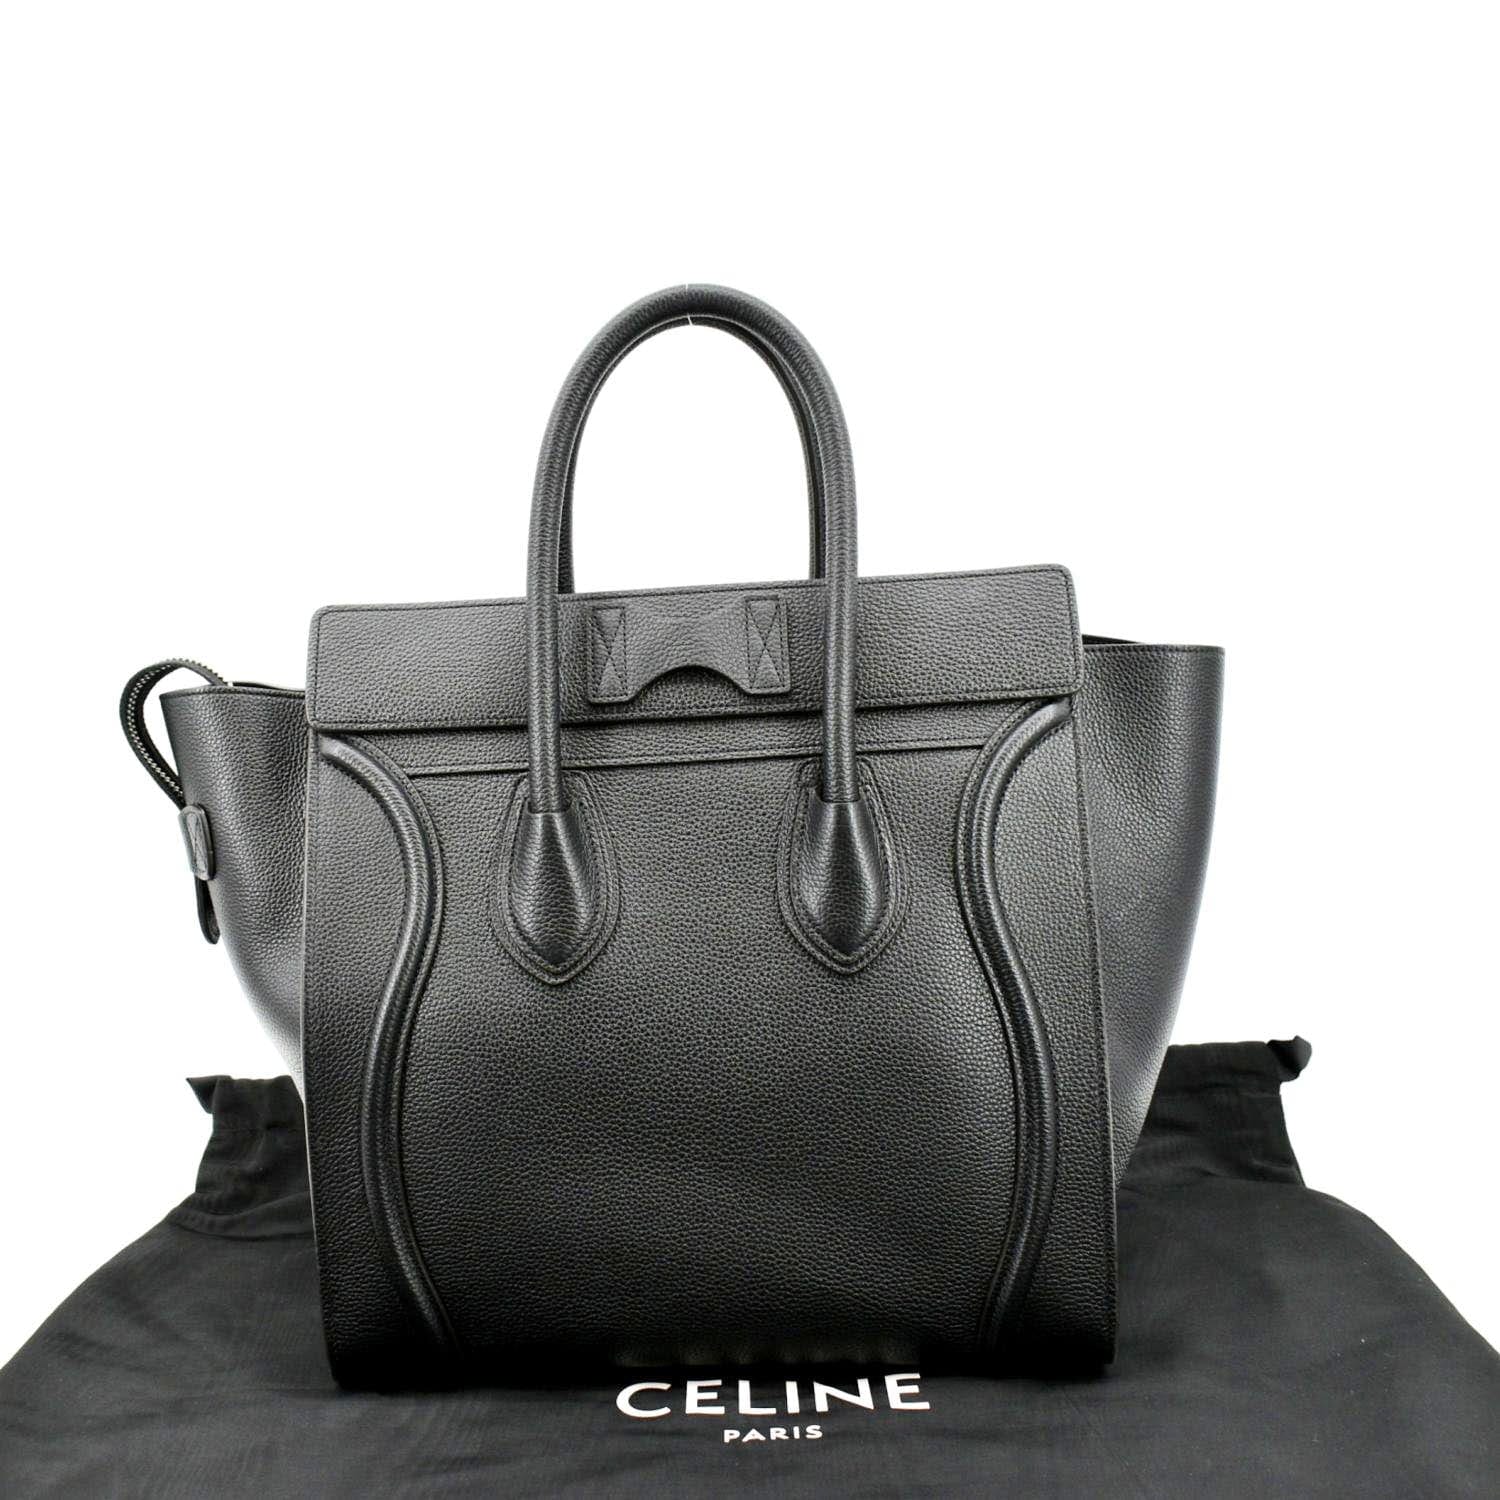 Authentic Celine Brand New Grey Leather Micro Luggage Tote Bag Size Large